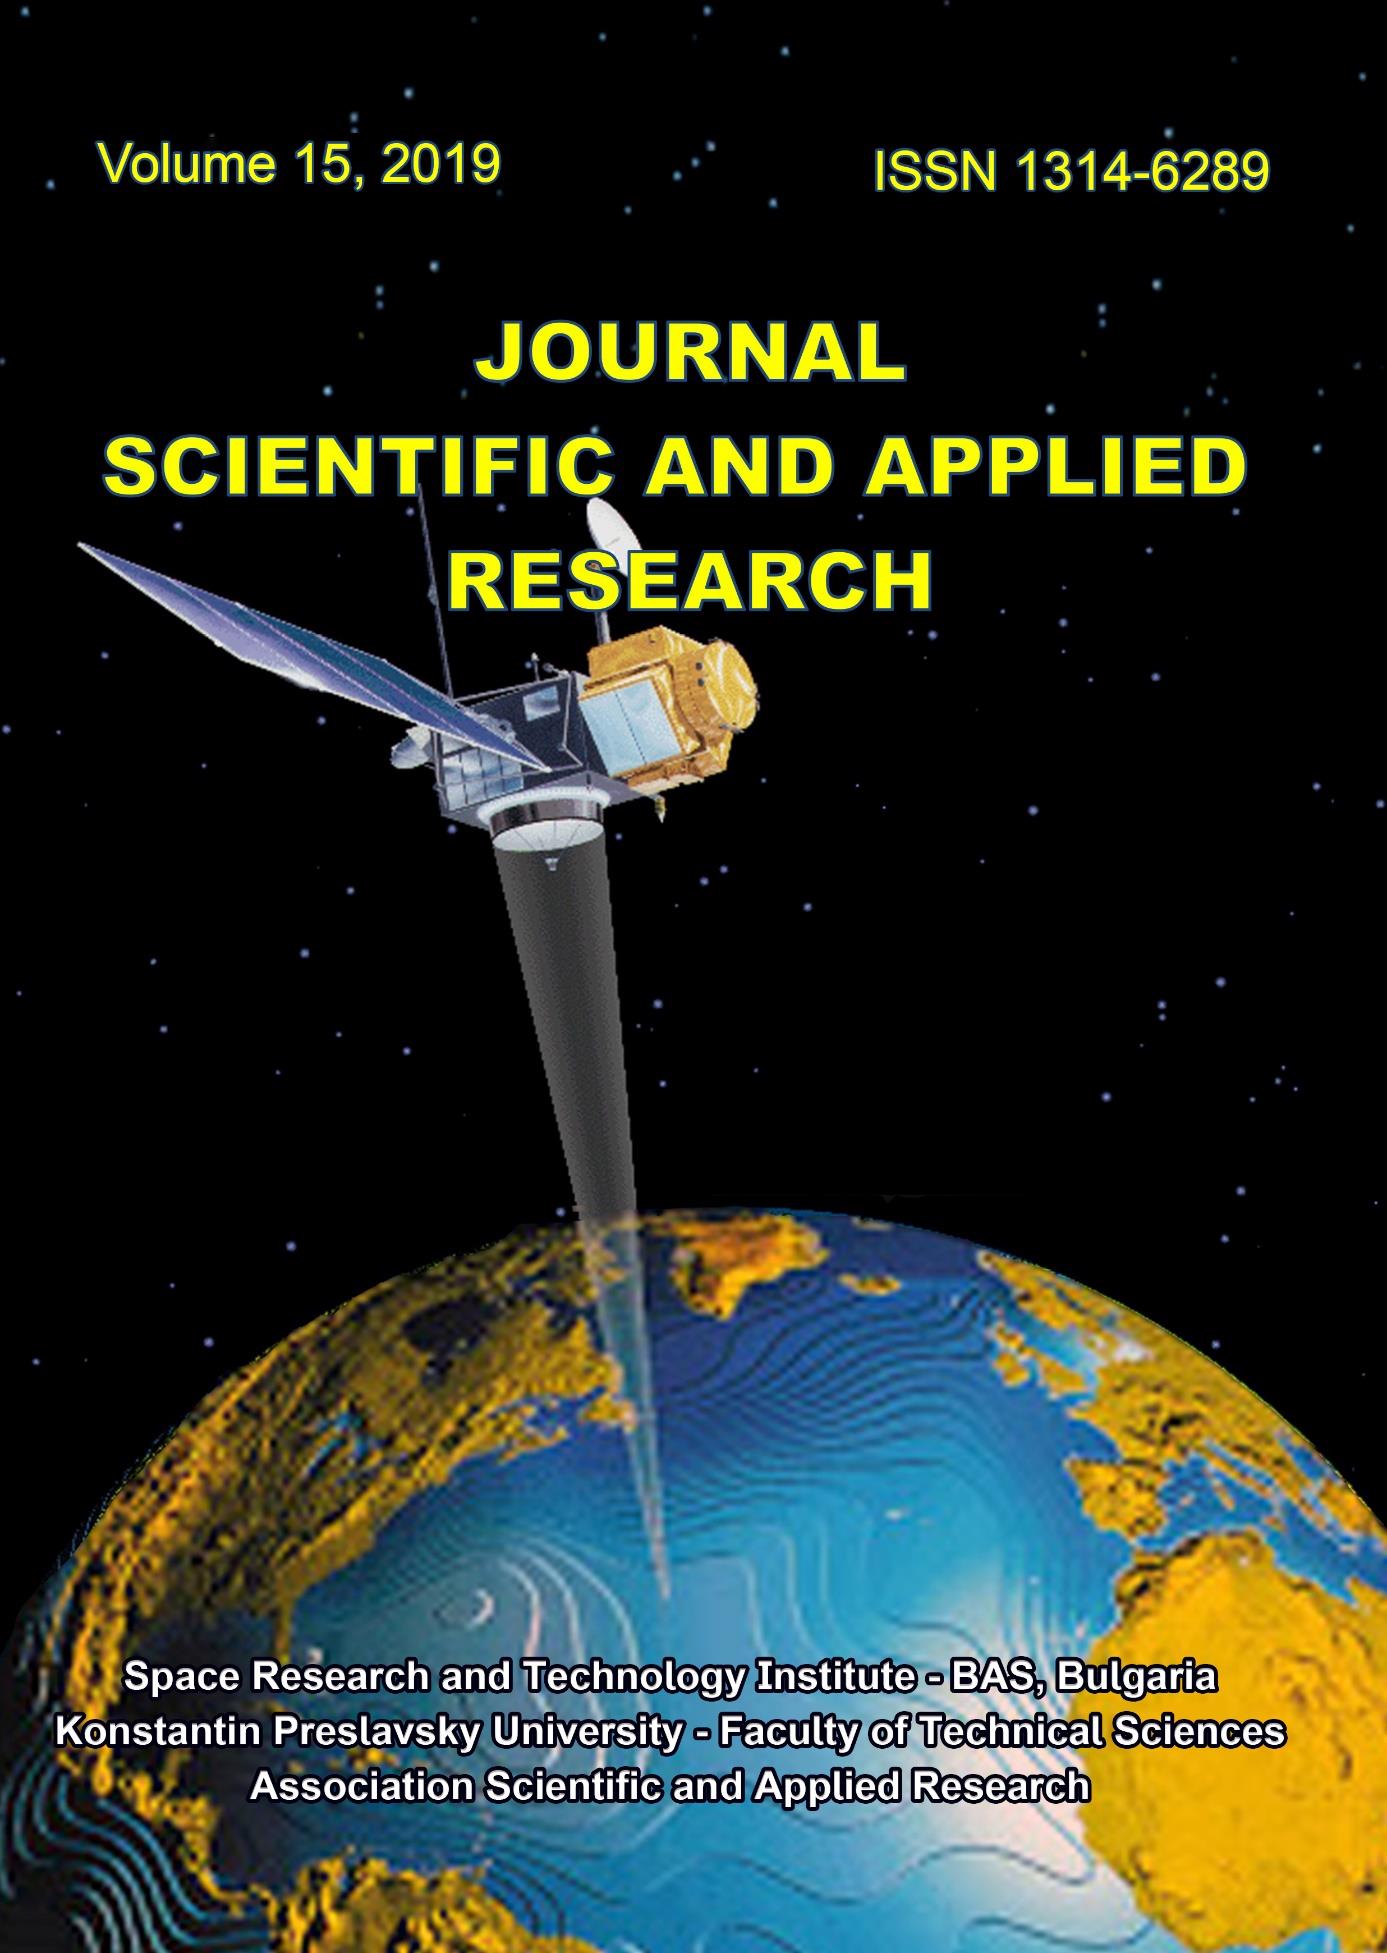 					View Vol. 15 No. 1 (2019): Journal Scientific and Applied Research
				